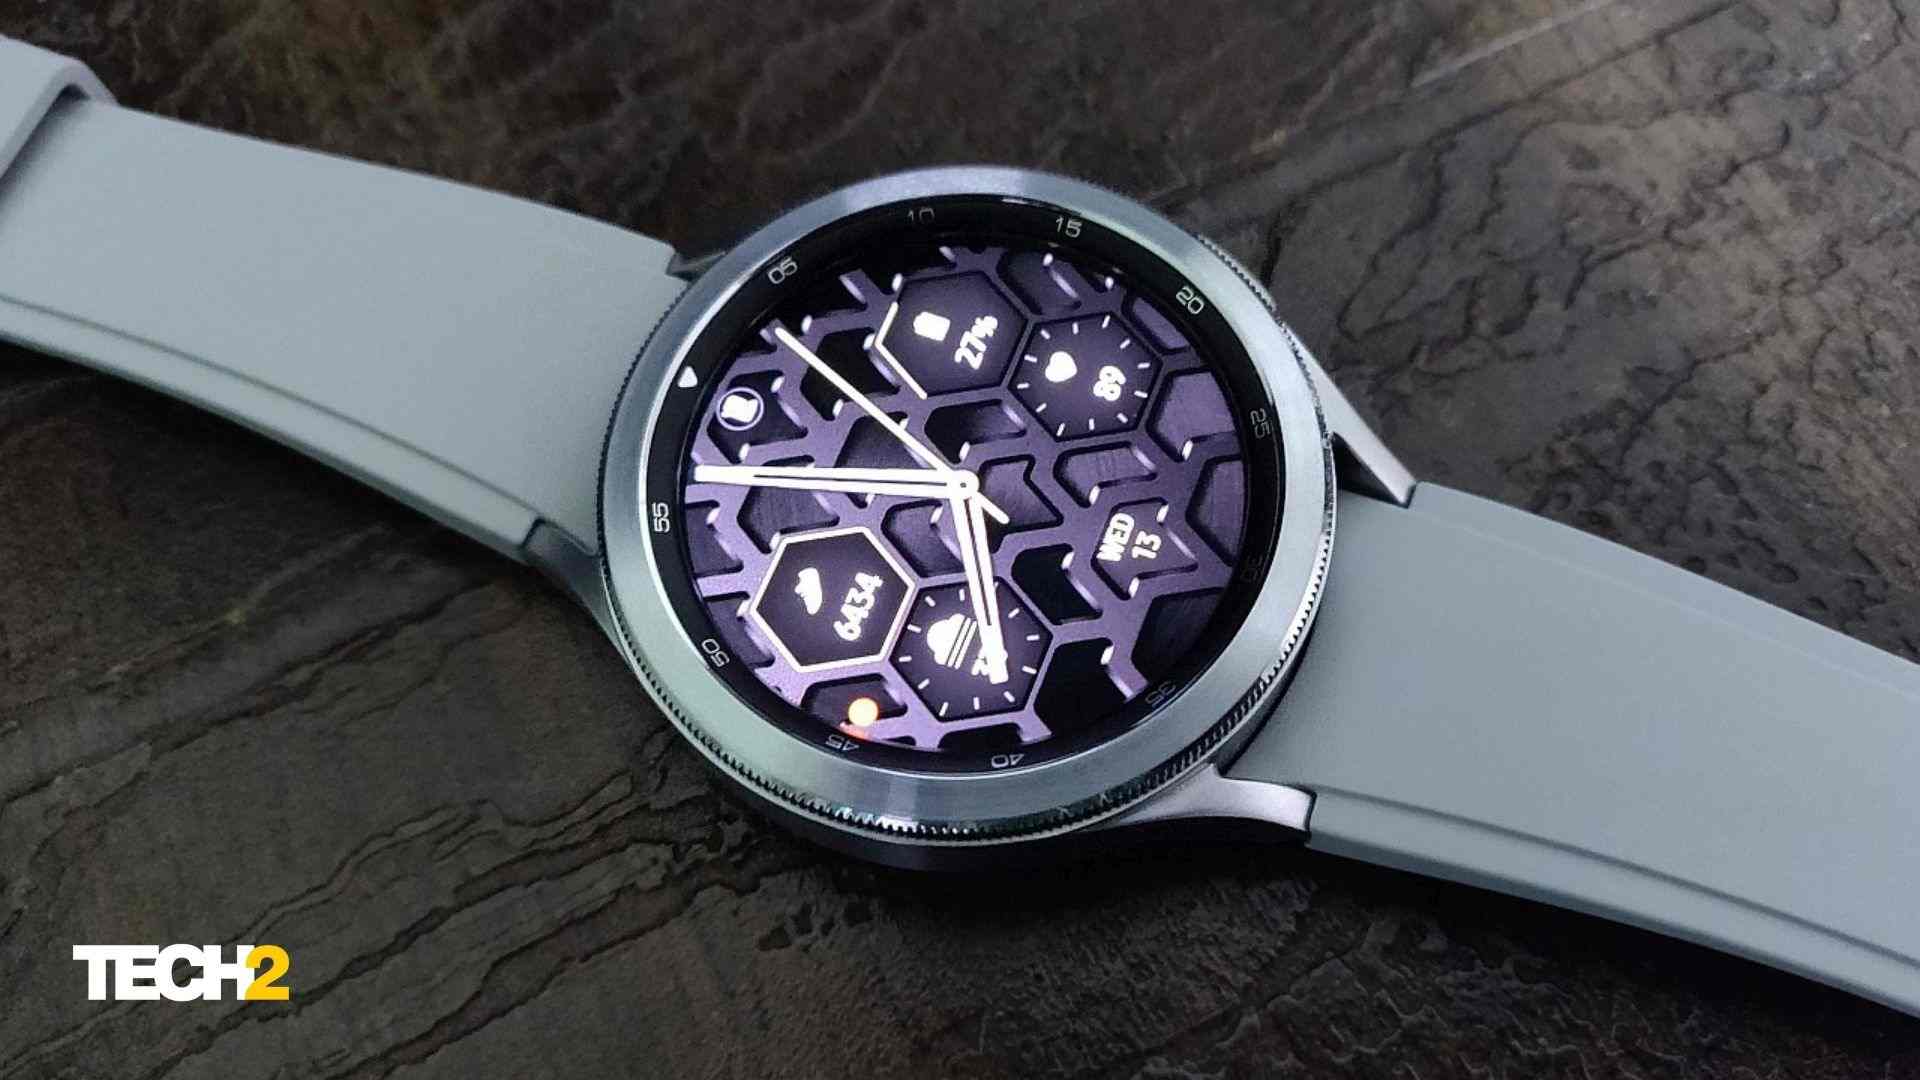 Samsung Galaxy Watch 4 Classic Review: High on features, low on